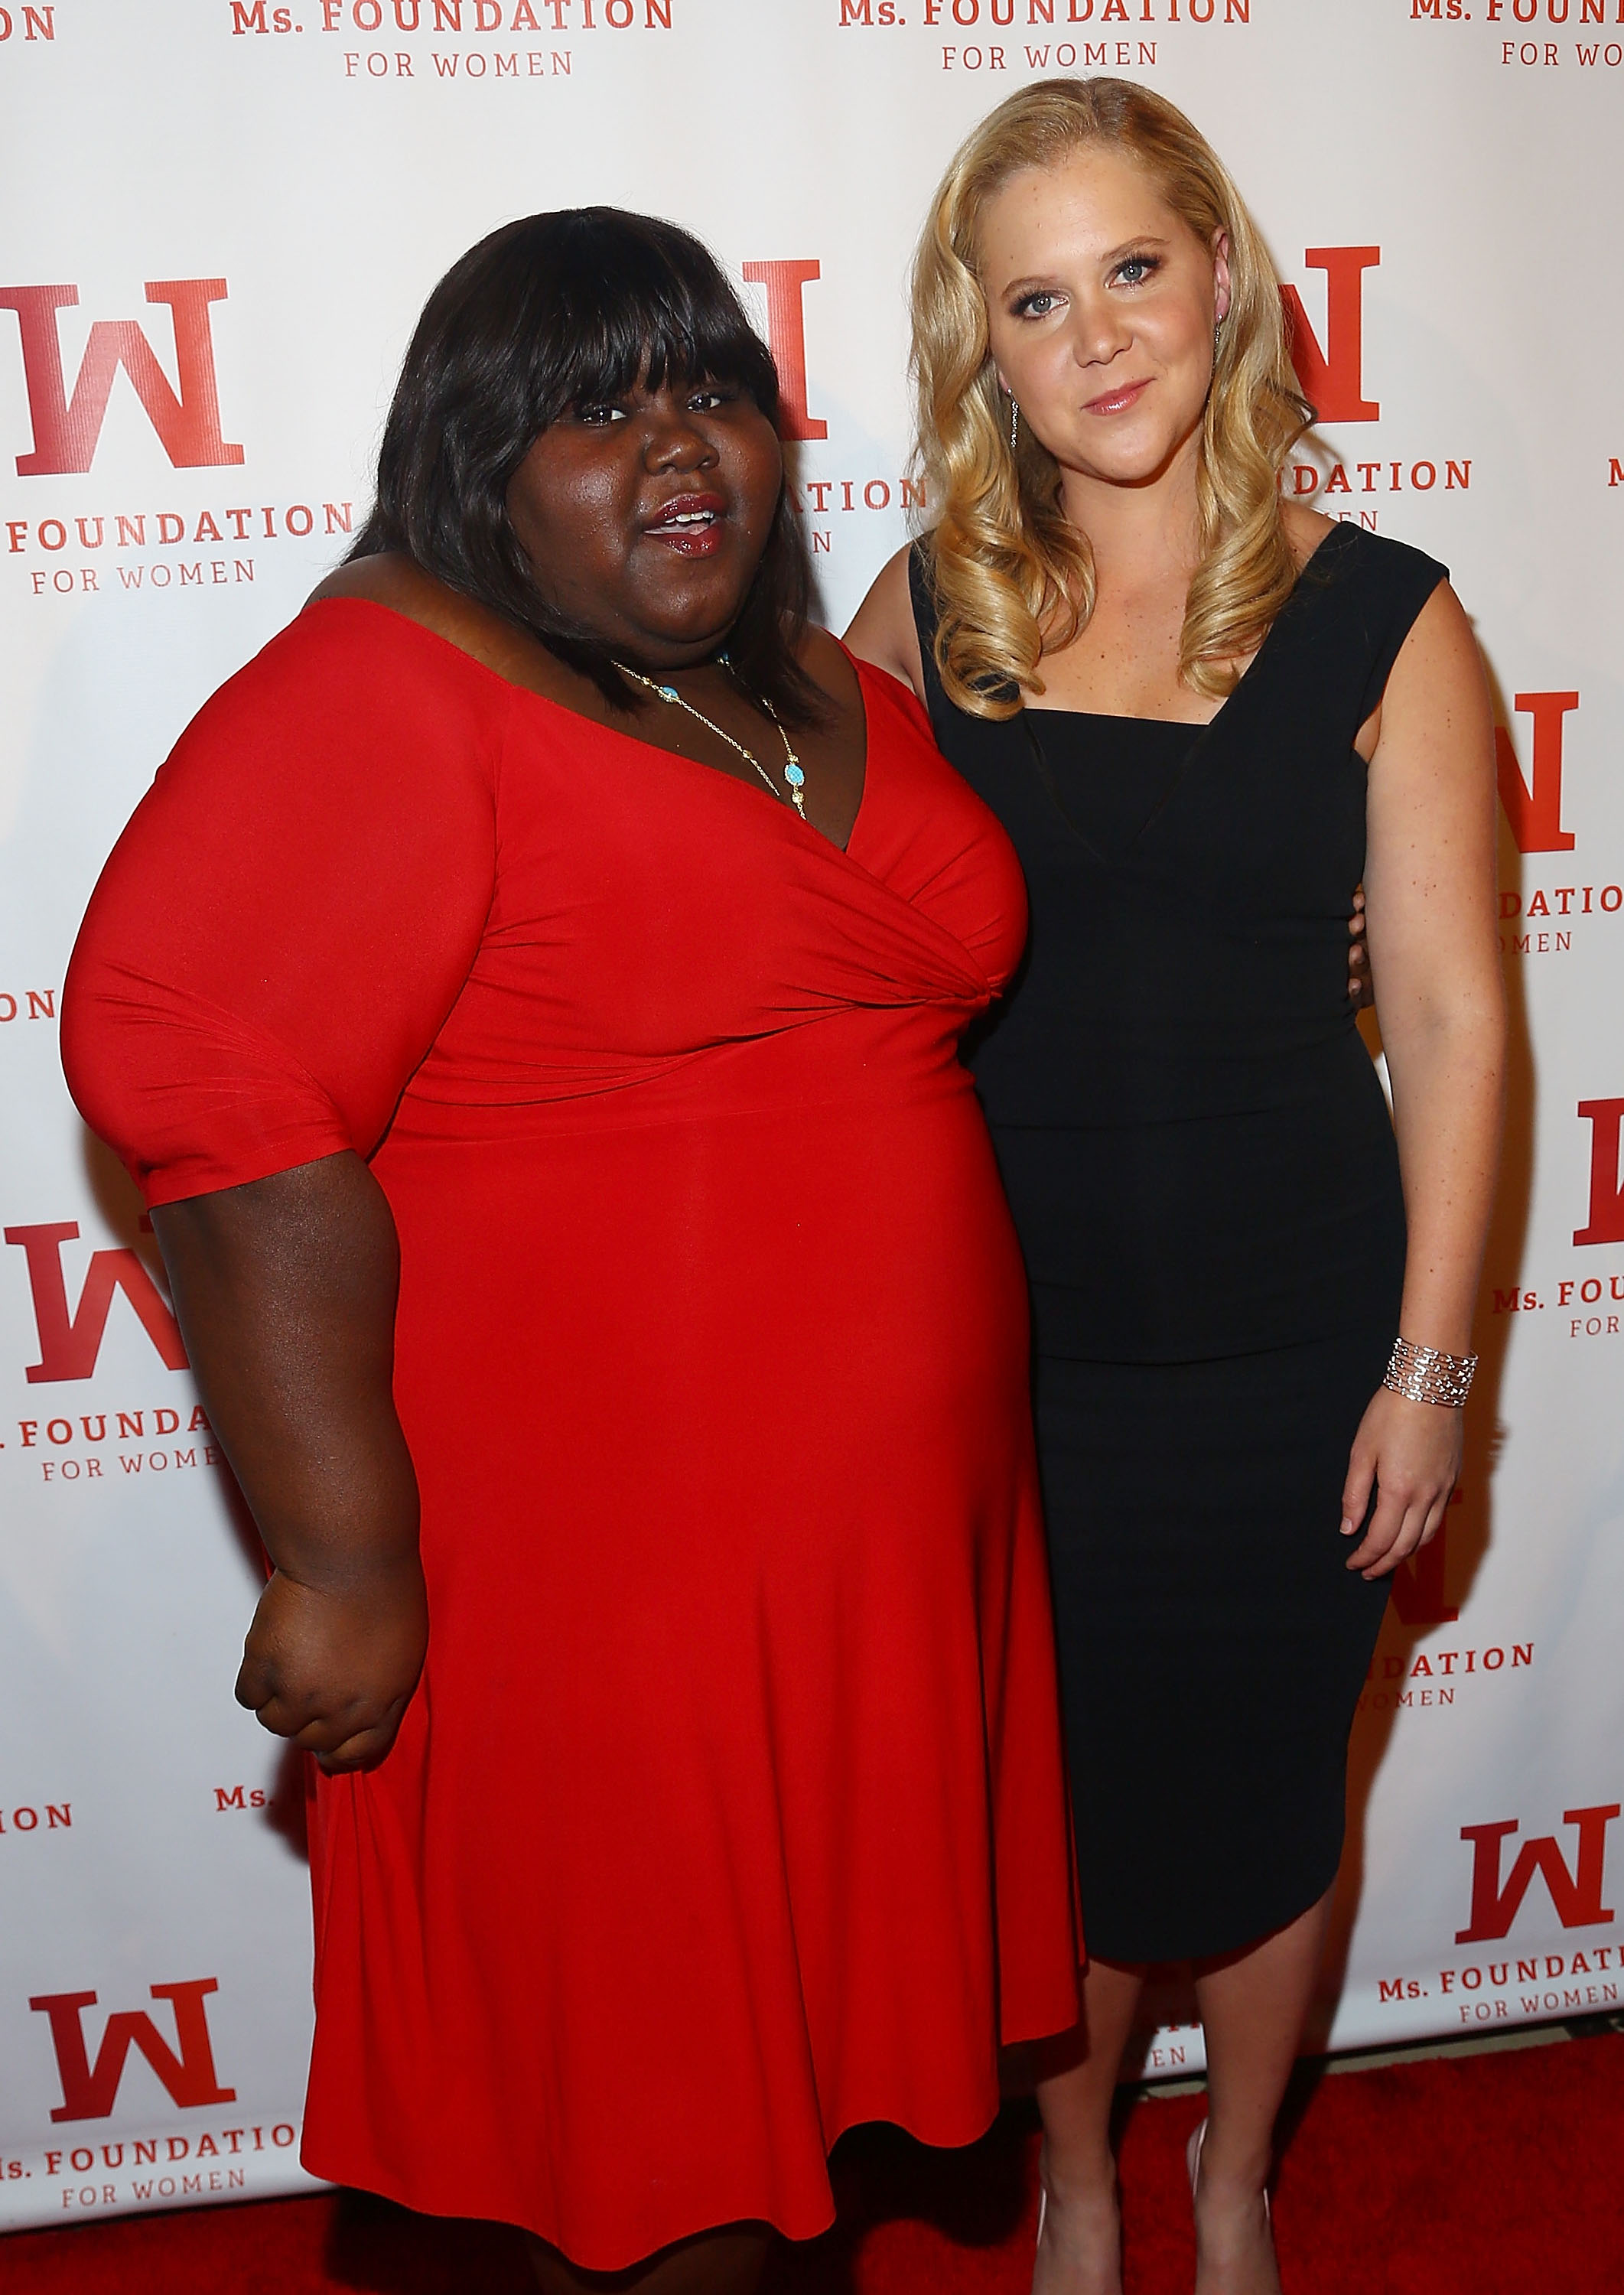 Gabourey Sidibe and Amy Schumer attend the Ms. Foundation Women Of Vision Gala 2014 on May 1, 2014 in New York City. (Astrid Stawiarz—Getty Images)